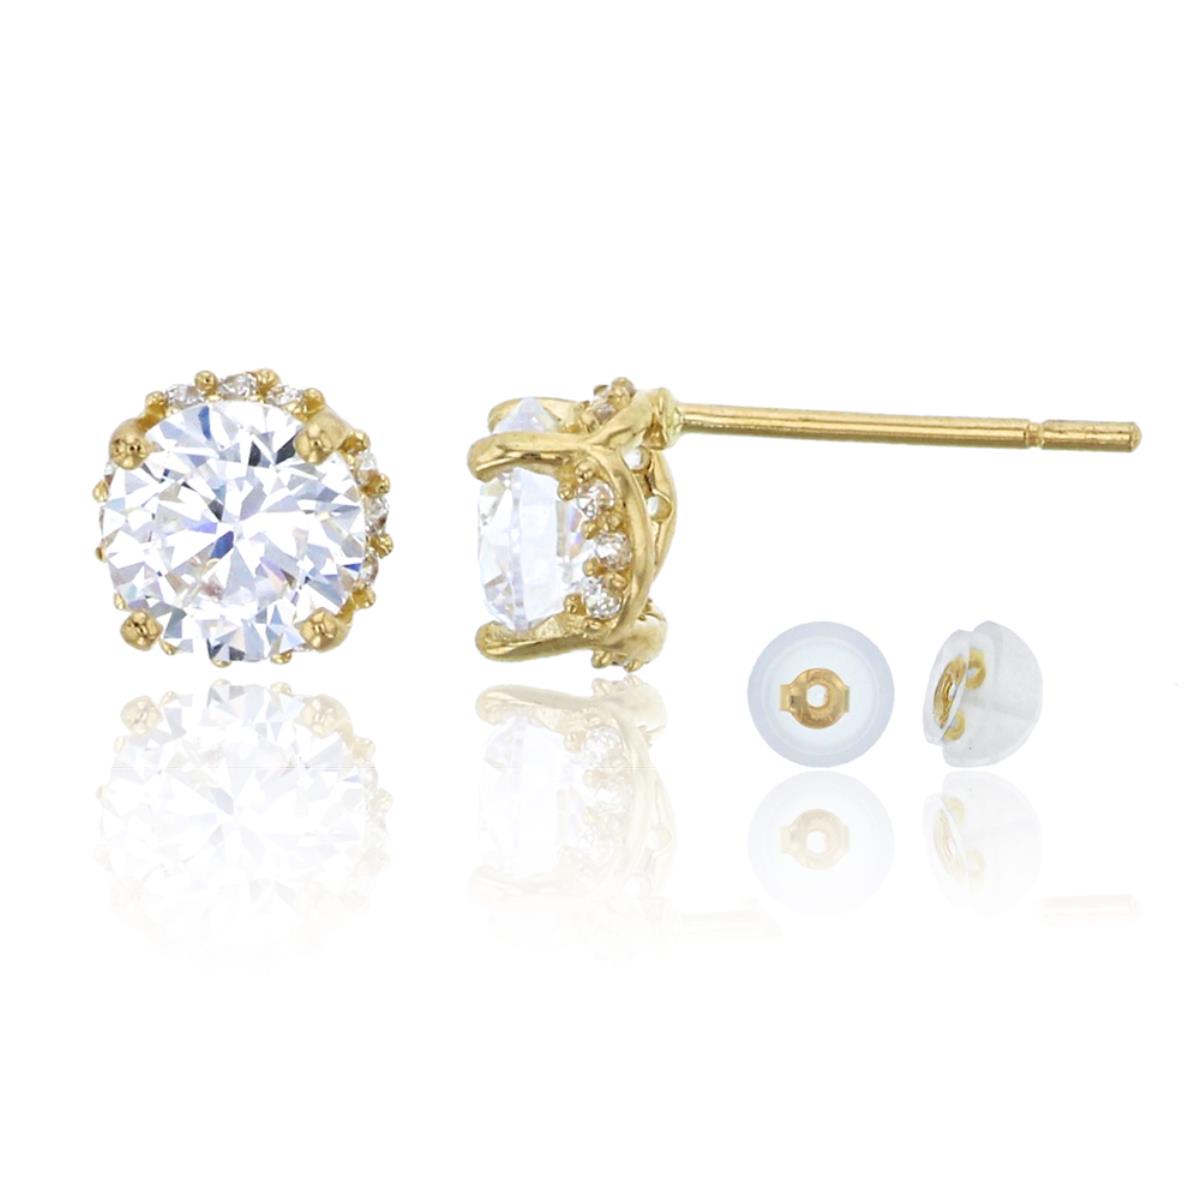 14K Yellow Gold Prong 5mm Round Cut CZ Stud Earring & 14K Silicone Back